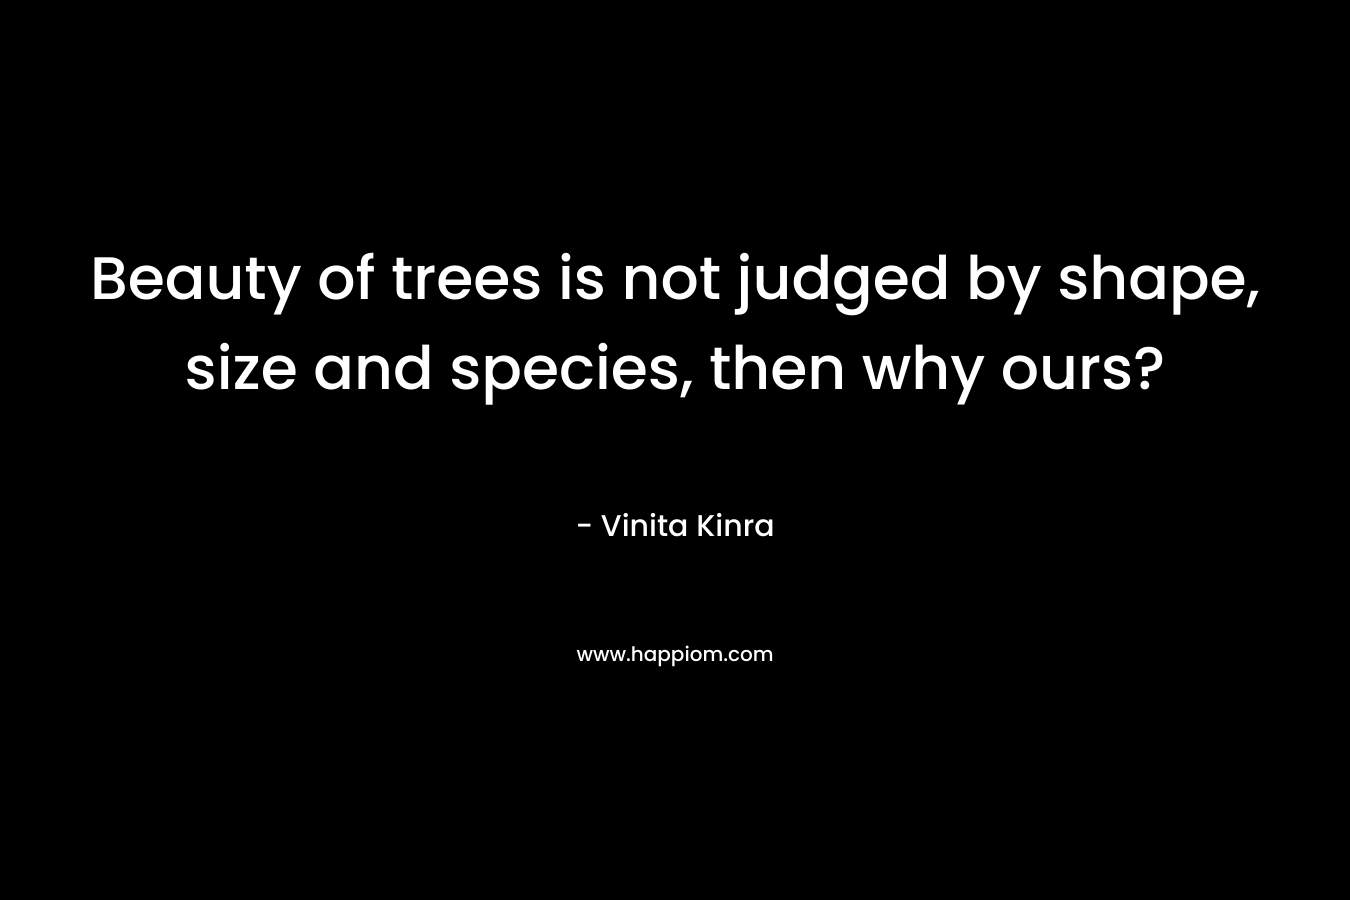 Beauty of trees is not judged by shape, size and species, then why ours?